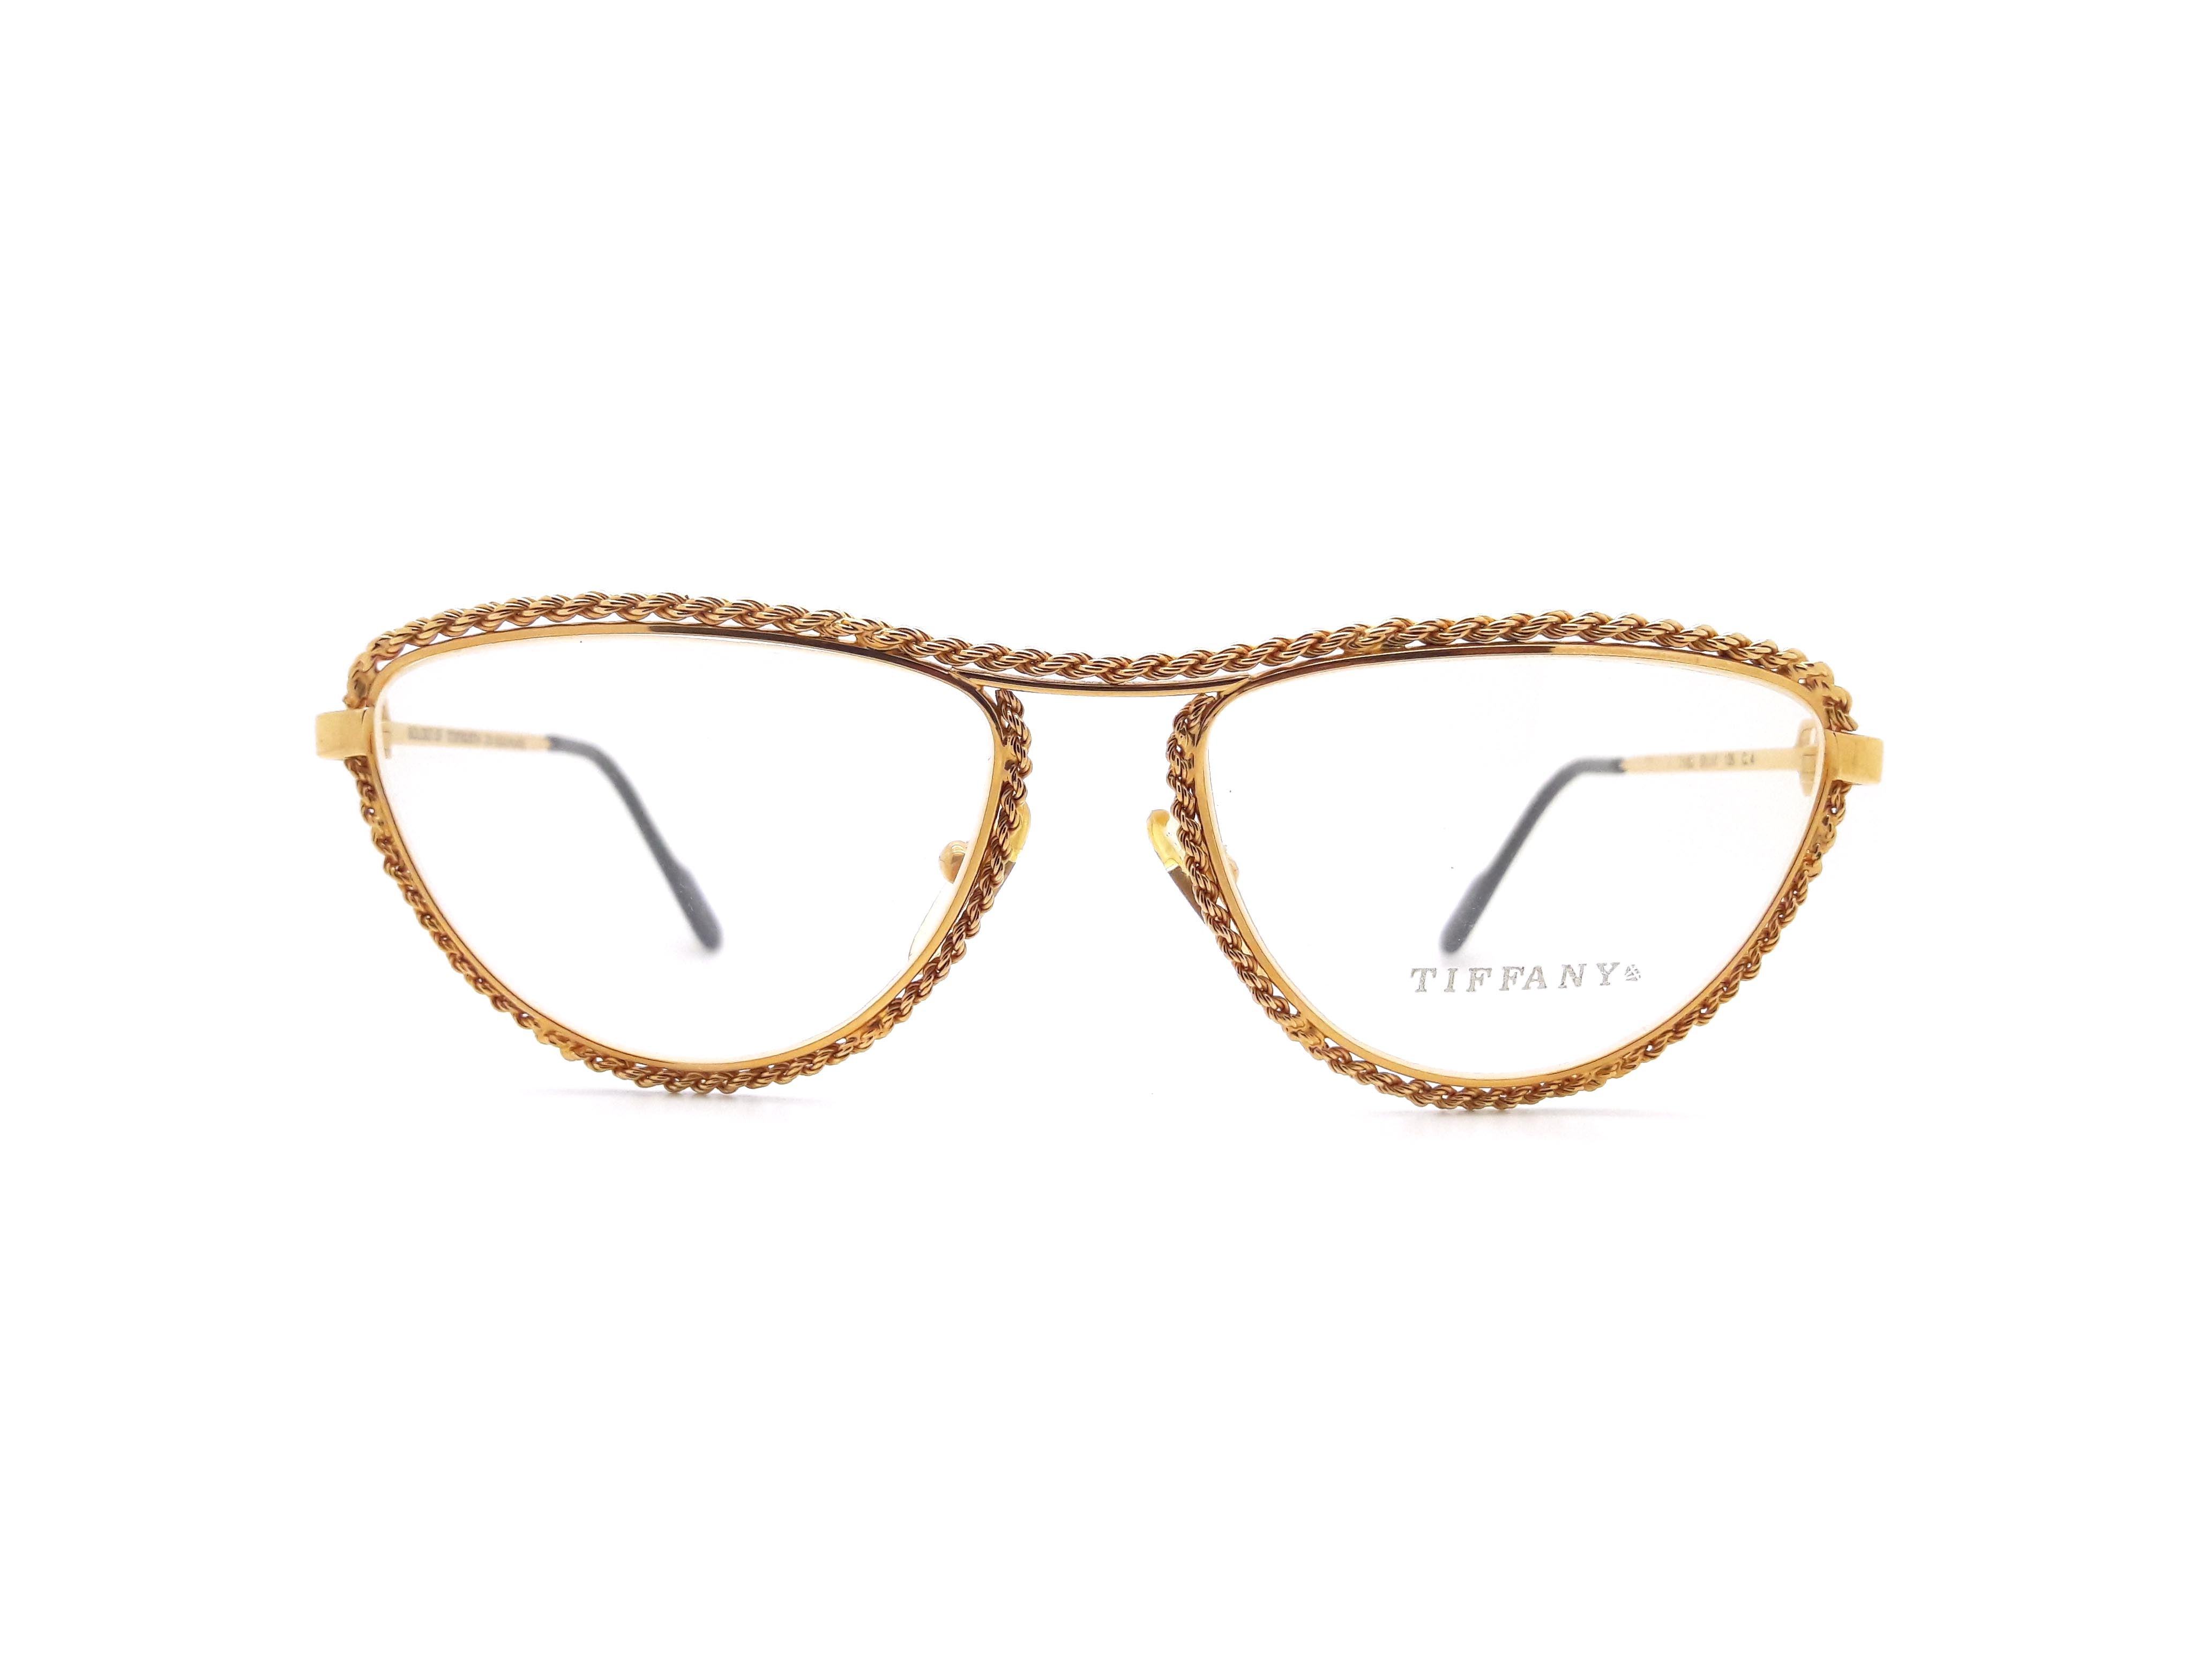 Life by Tiffany Lunettes T1/03 Vintage Cateye Glasses – Ed & Sarna